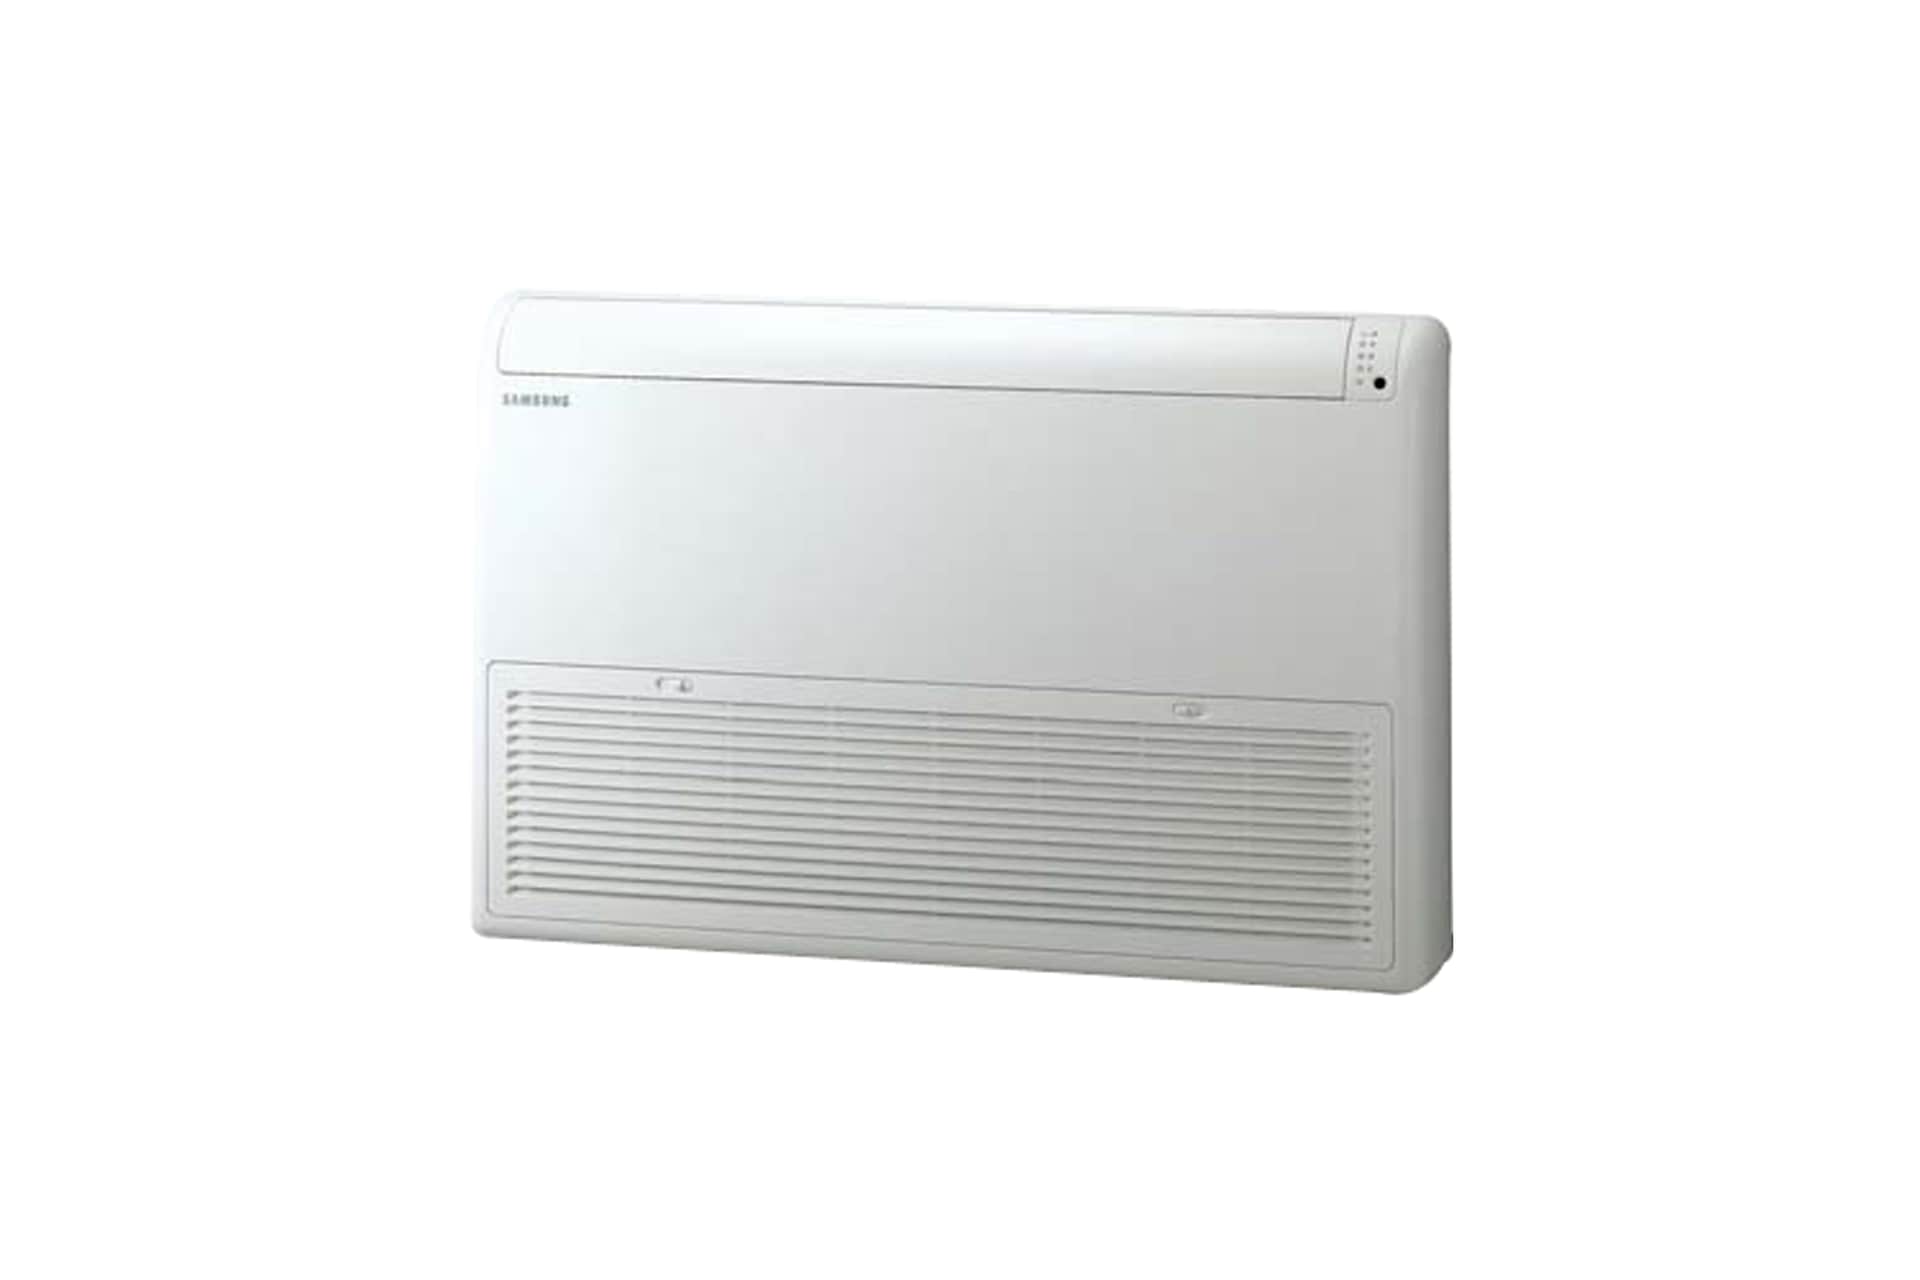 1 6 Ton Ceiling Mounted Ac Unit Am056fnfdeh Samsung India